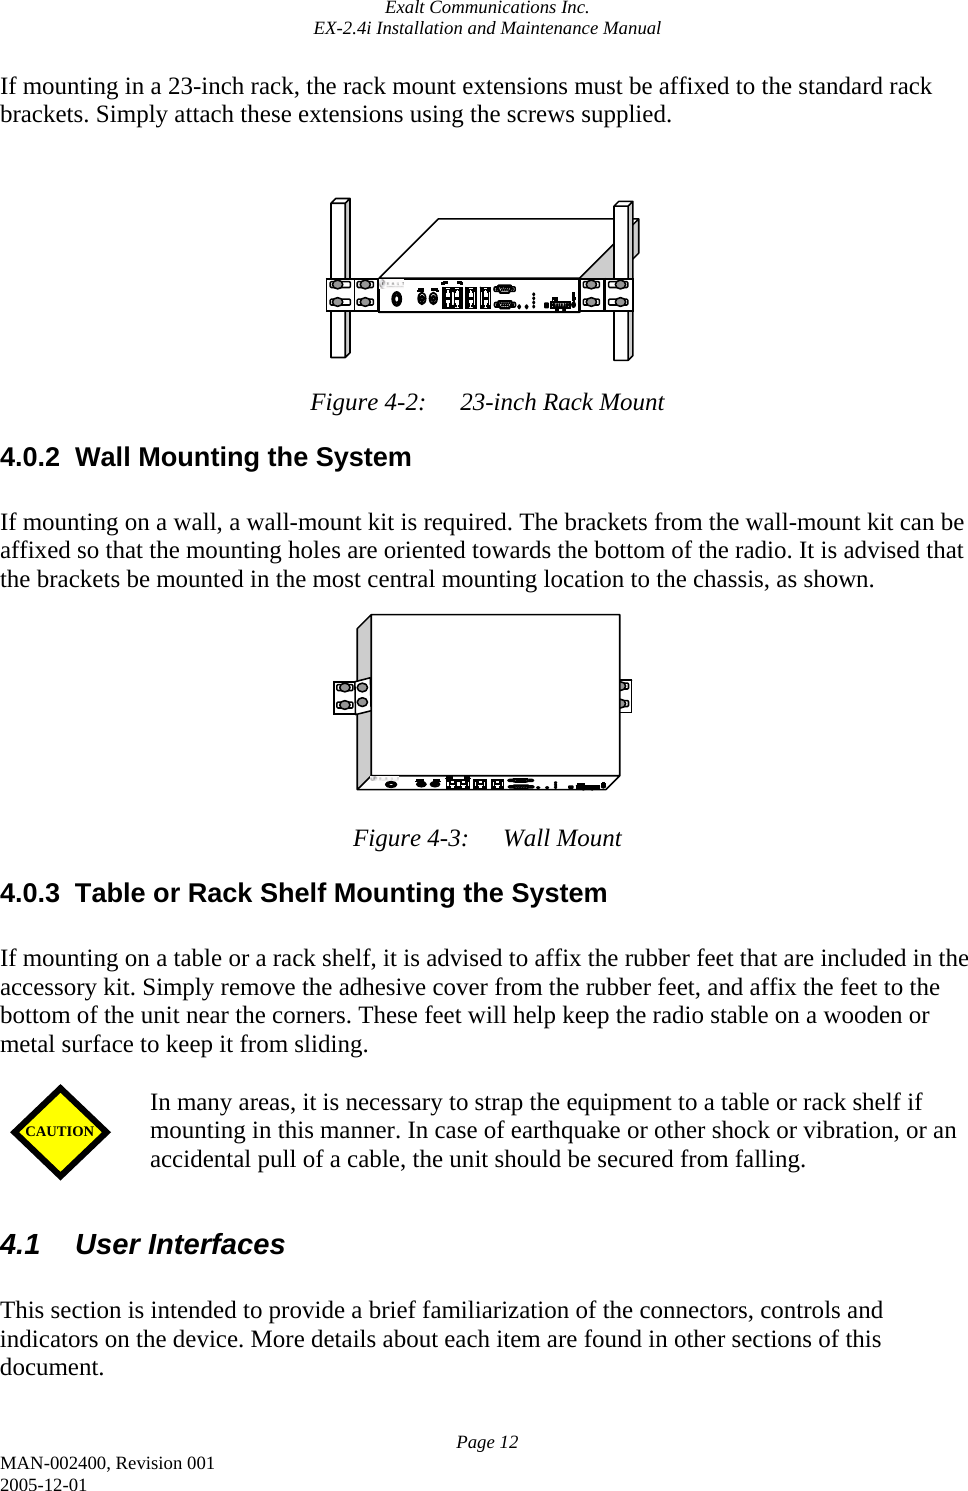 Exalt Communications Inc. EX-2.4i Installation and Maintenance Manual Page 12 MAN-002400, Revision 001 2005-12-01 If mounting in a 23-inch rack, the rack mount extensions must be affixed to the standard rack brackets. Simply attach these extensions using the screws supplied.           Figure 4-2:  23-inch Rack Mount 4.0.2  Wall Mounting the System  If mounting on a wall, a wall-mount kit is required. The brackets from the wall-mount kit can be affixed so that the mounting holes are oriented towards the bottom of the radio. It is advised that the brackets be mounted in the most central mounting location to the chassis, as shown.          Figure 4-3:  Wall Mount 4.0.3  Table or Rack Shelf Mounting the System  If mounting on a table or a rack shelf, it is advised to affix the rubber feet that are included in the accessory kit. Simply remove the adhesive cover from the rubber feet, and affix the feet to the bottom of the unit near the corners. These feet will help keep the radio stable on a wooden or metal surface to keep it from sliding.   In many areas, it is necessary to strap the equipment to a table or rack shelf if mounting in this manner. In case of earthquake or other shock or vibration, or an accidental pull of a cable, the unit should be secured from falling.  4.1 User Interfaces  This section is intended to provide a brief familiarization of the connectors, controls and indicators on the device. More details about each item are found in other sections of this document.  CAUTION 